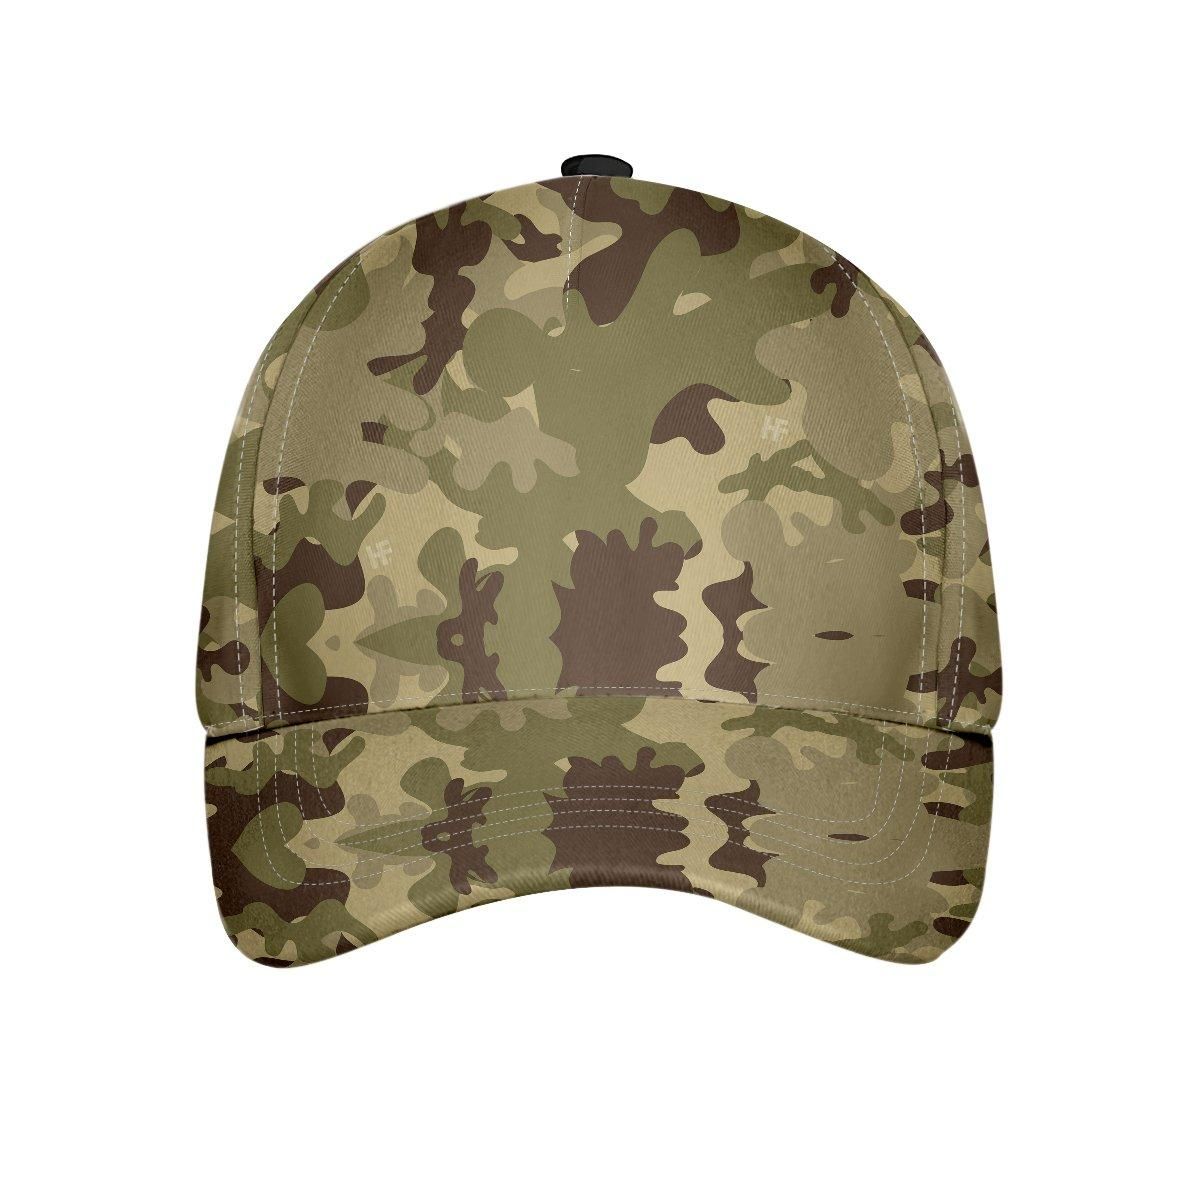 Camo Pattern Hunting Style Cap